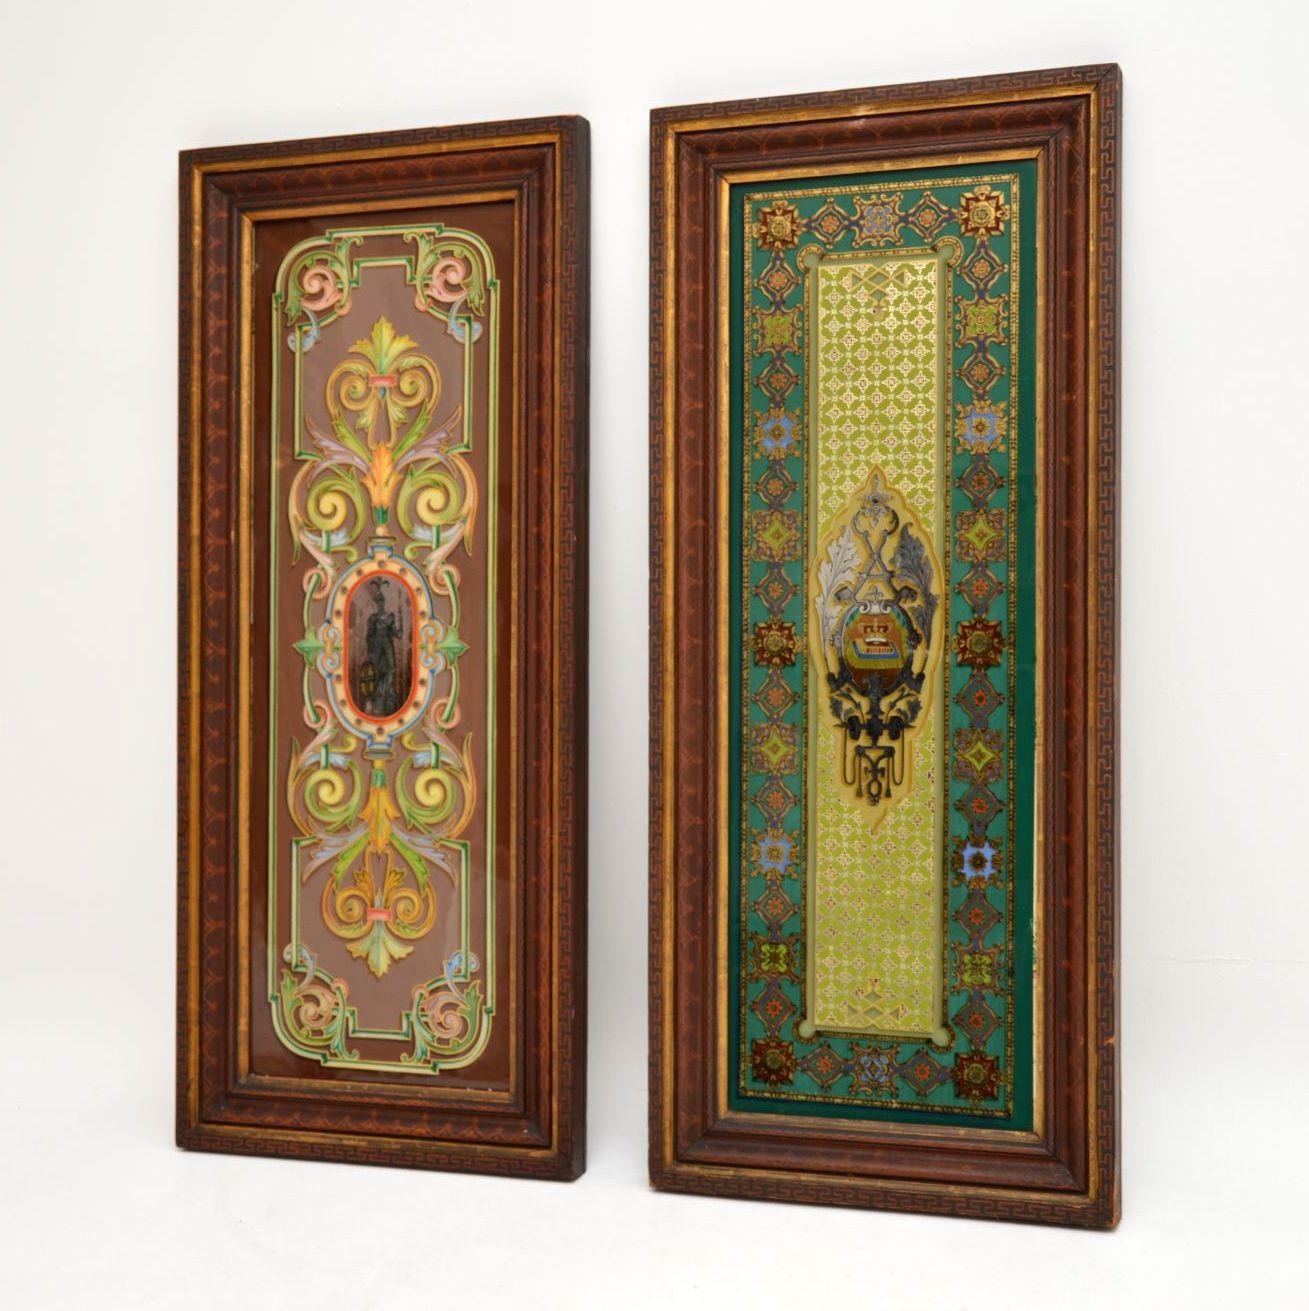 Pair of large antique Art Nouveau decorated glass panels on original frames & dating to around the 1890s period. The decoration on the glass is stunning & different on each one. They are the same size & were obviously made at the same time to